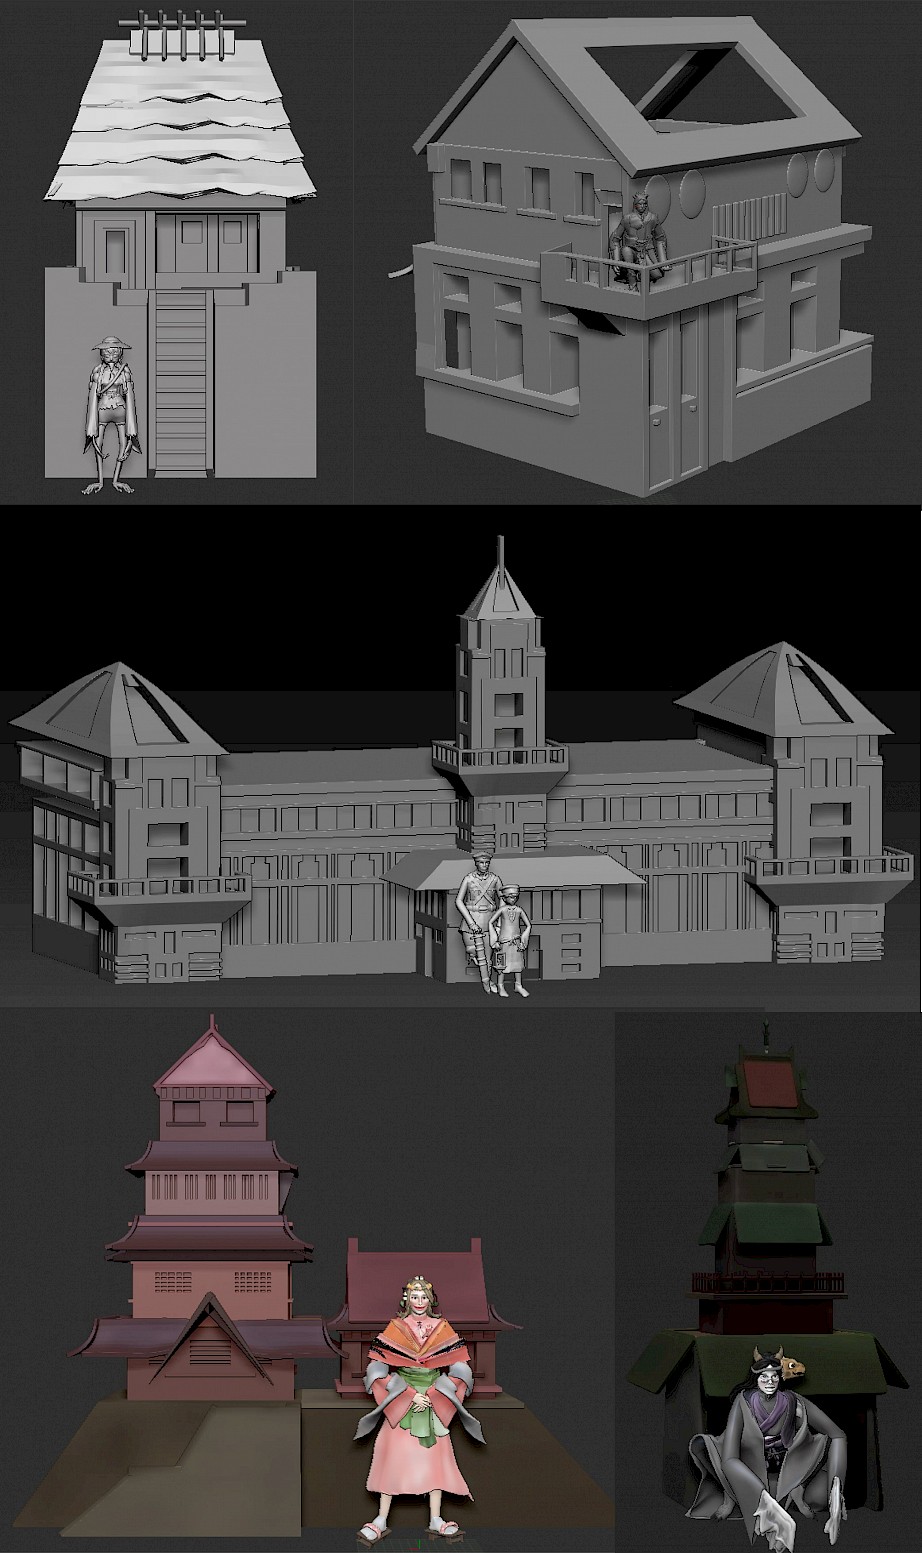 3D models of the character and set design